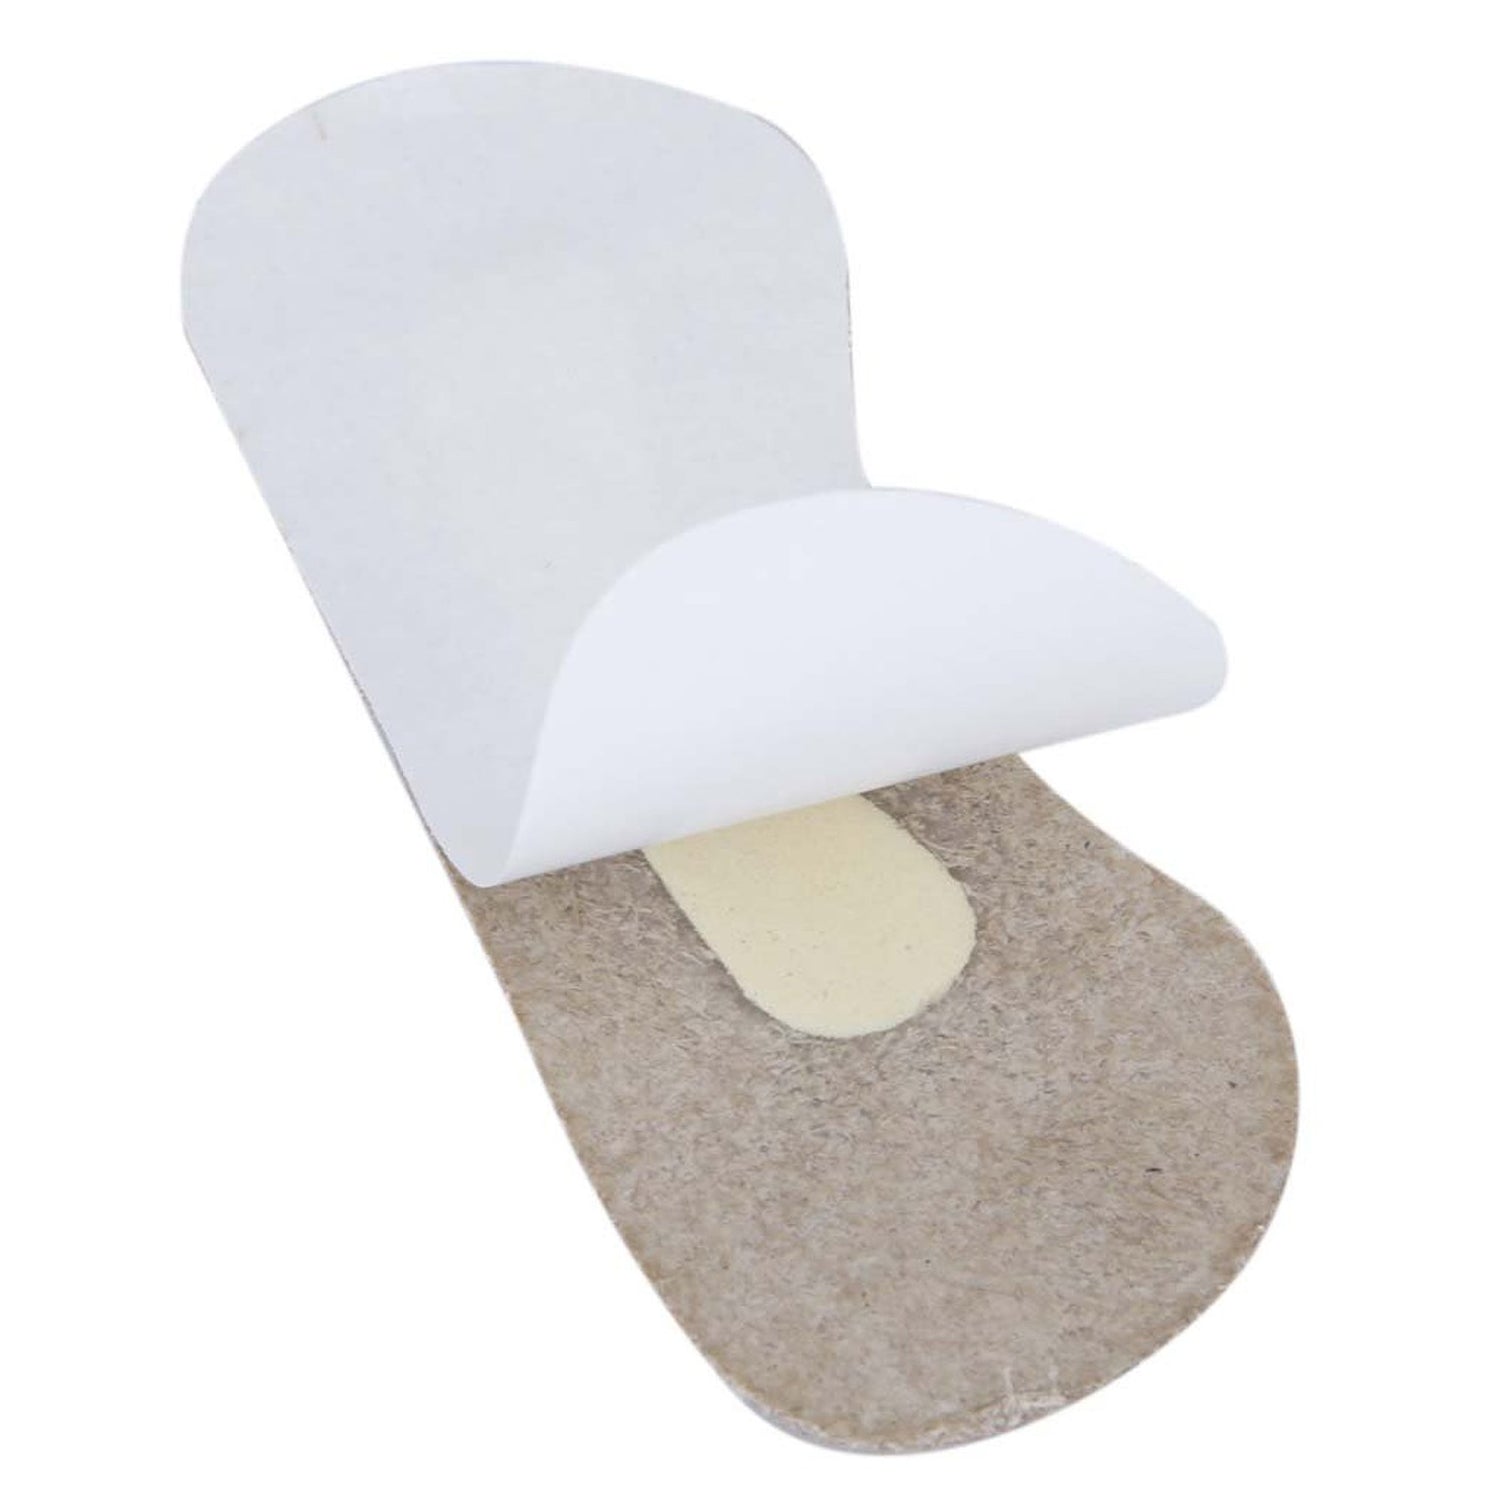 Hot-1 Pair of Lambskin Back-of Artificial Heel Protector Shoe Pads, To Prevent Bubbles - ebowsos